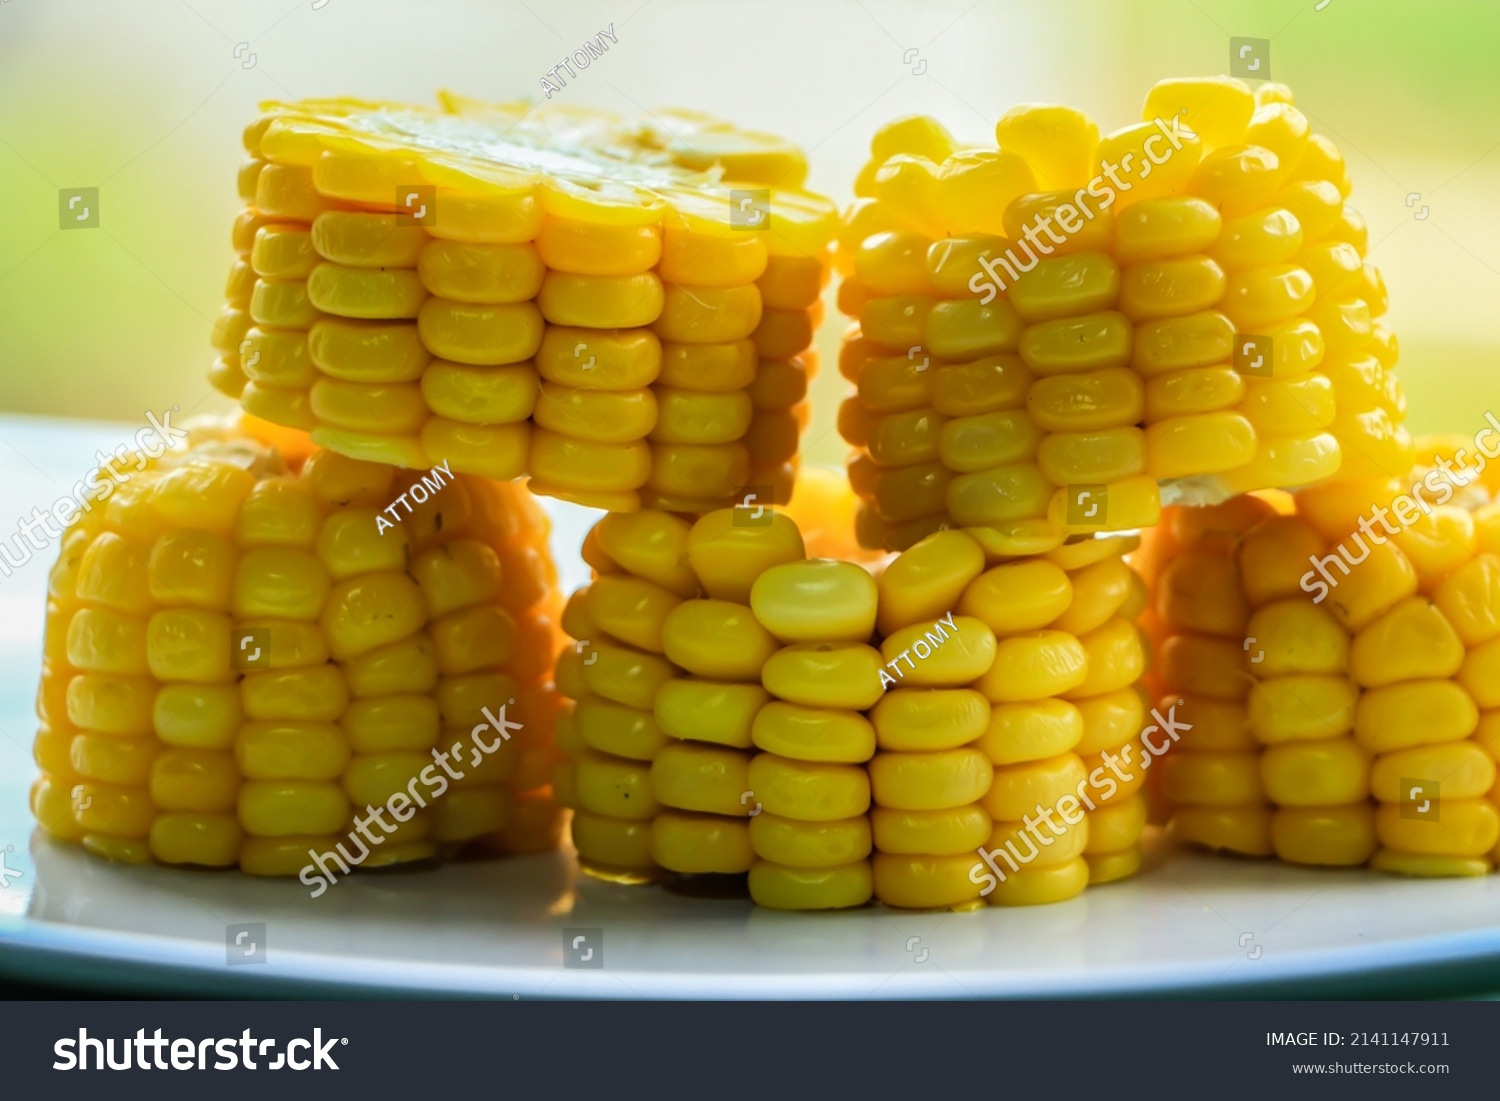 Corn on the cob is one of the healthy foods that are rich in fiber and have nutrients that are beneficial for the body. Corn on the cob contains water, protein, carbohydrates, sugar, fiber, and fat. #2141147911